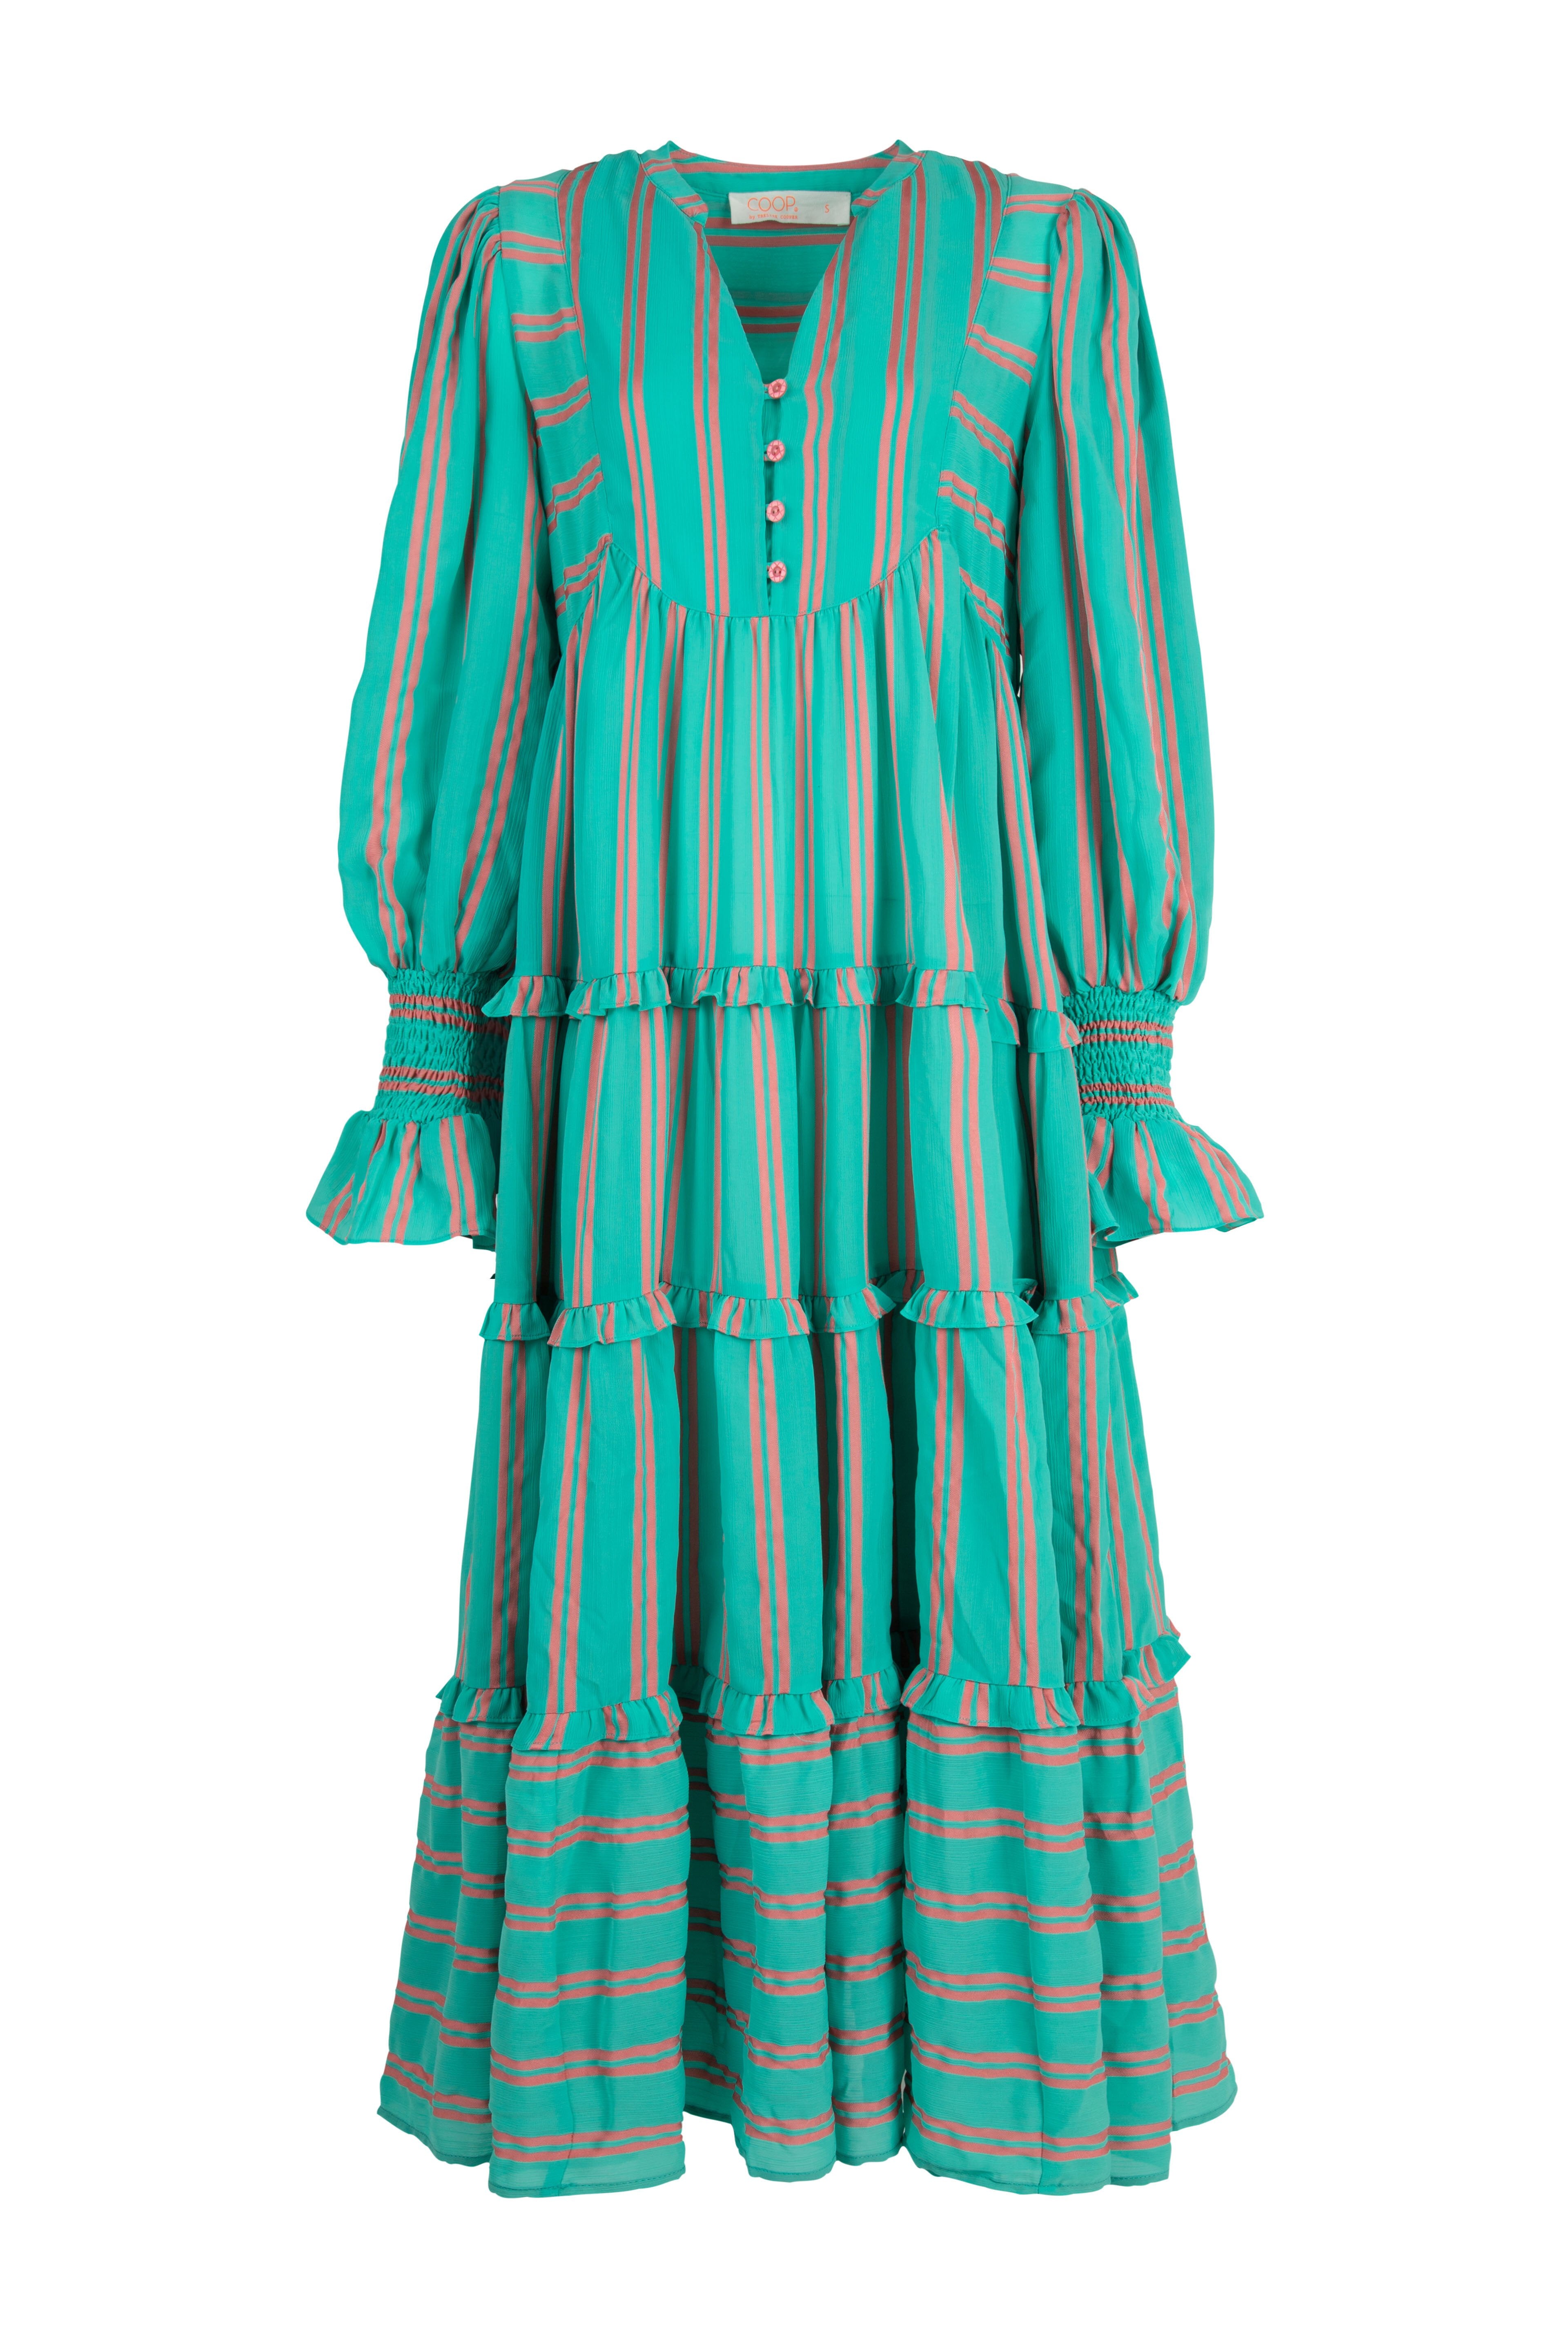 COOP  - STRIPE OUT Dress